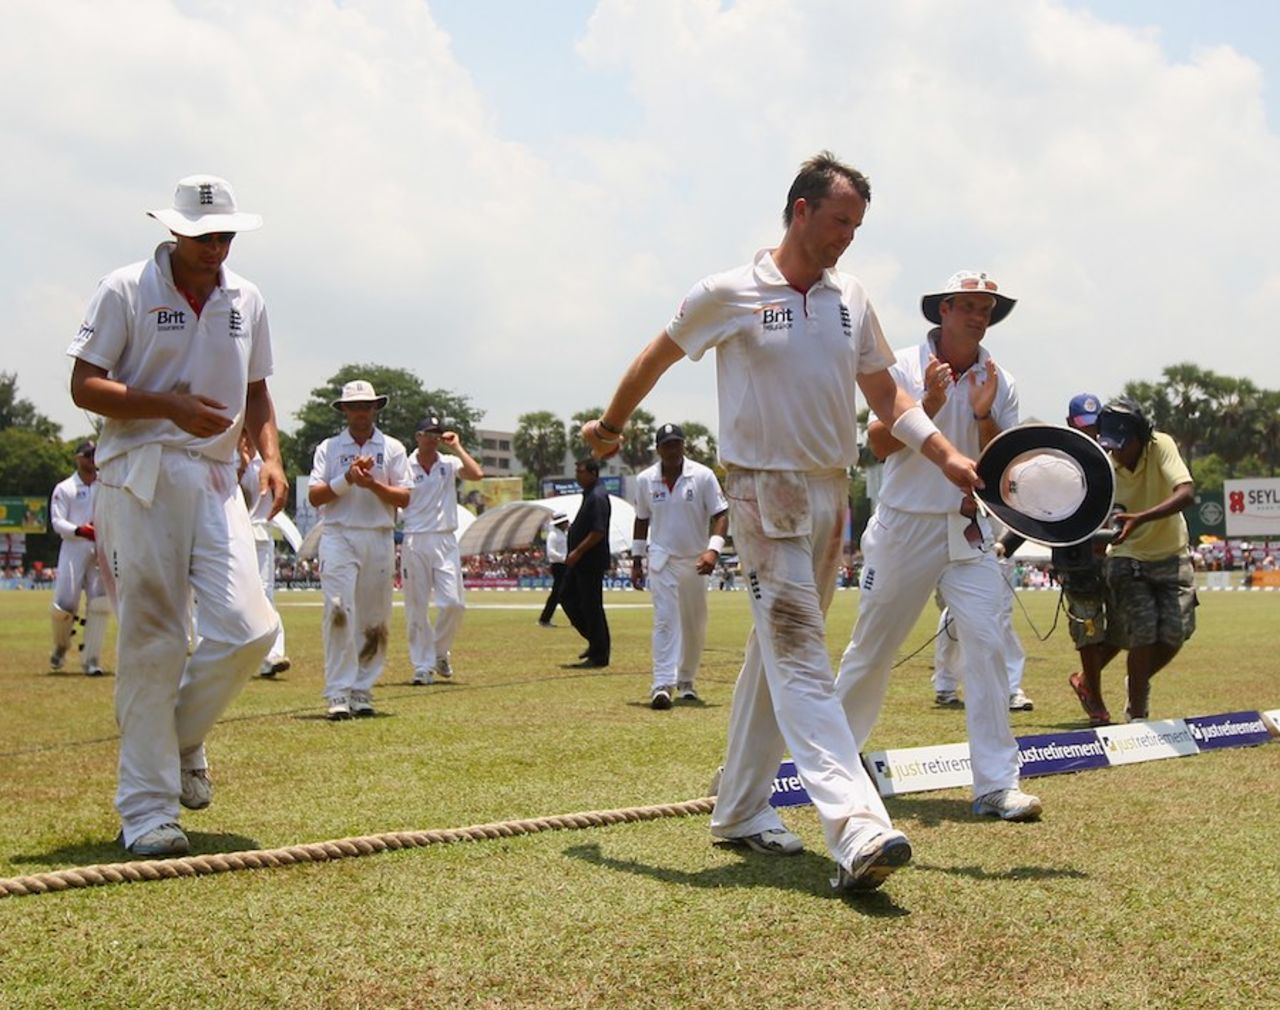 Graeme Swann leads his team off the field, Sri Lanka v England, 2nd Test, Colombo, P Sara Oval, 5th day, April 7, 2012